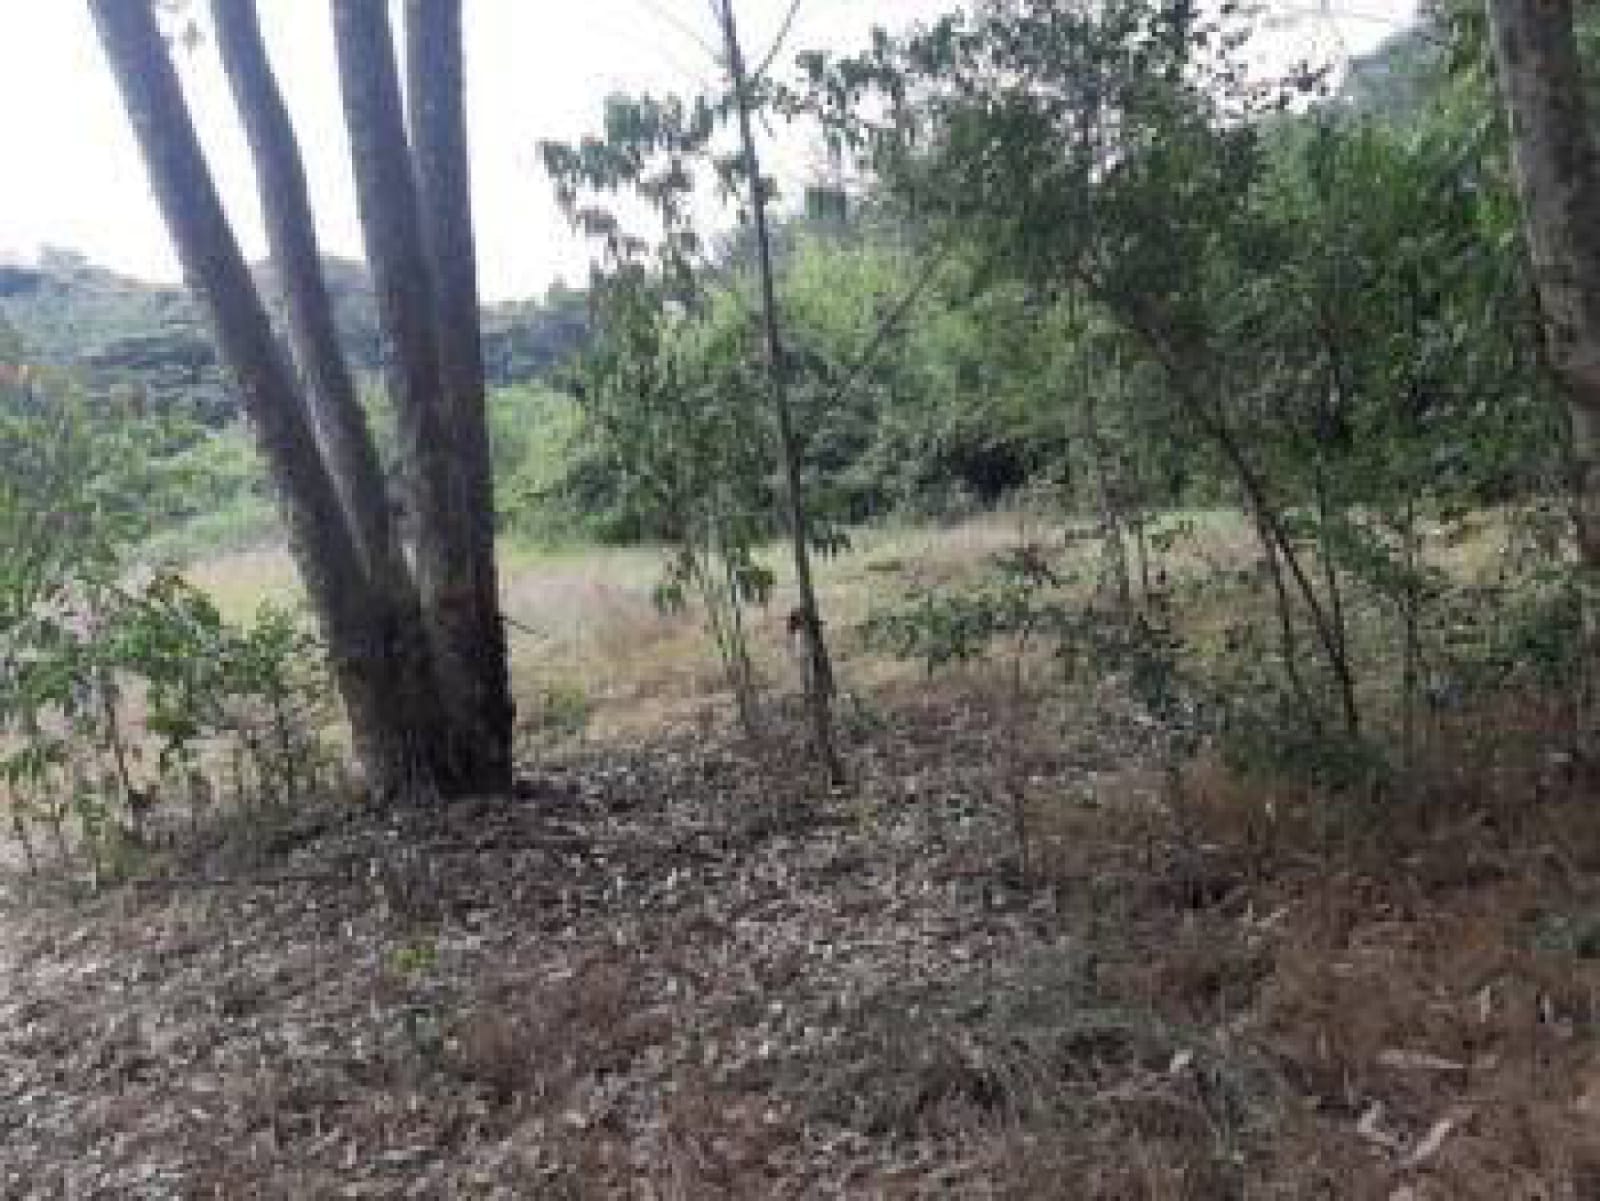 Land for sale in Karen KCB Red soil 1 Acre Ready Title Deed QUICK SALE Exclusive Red soil